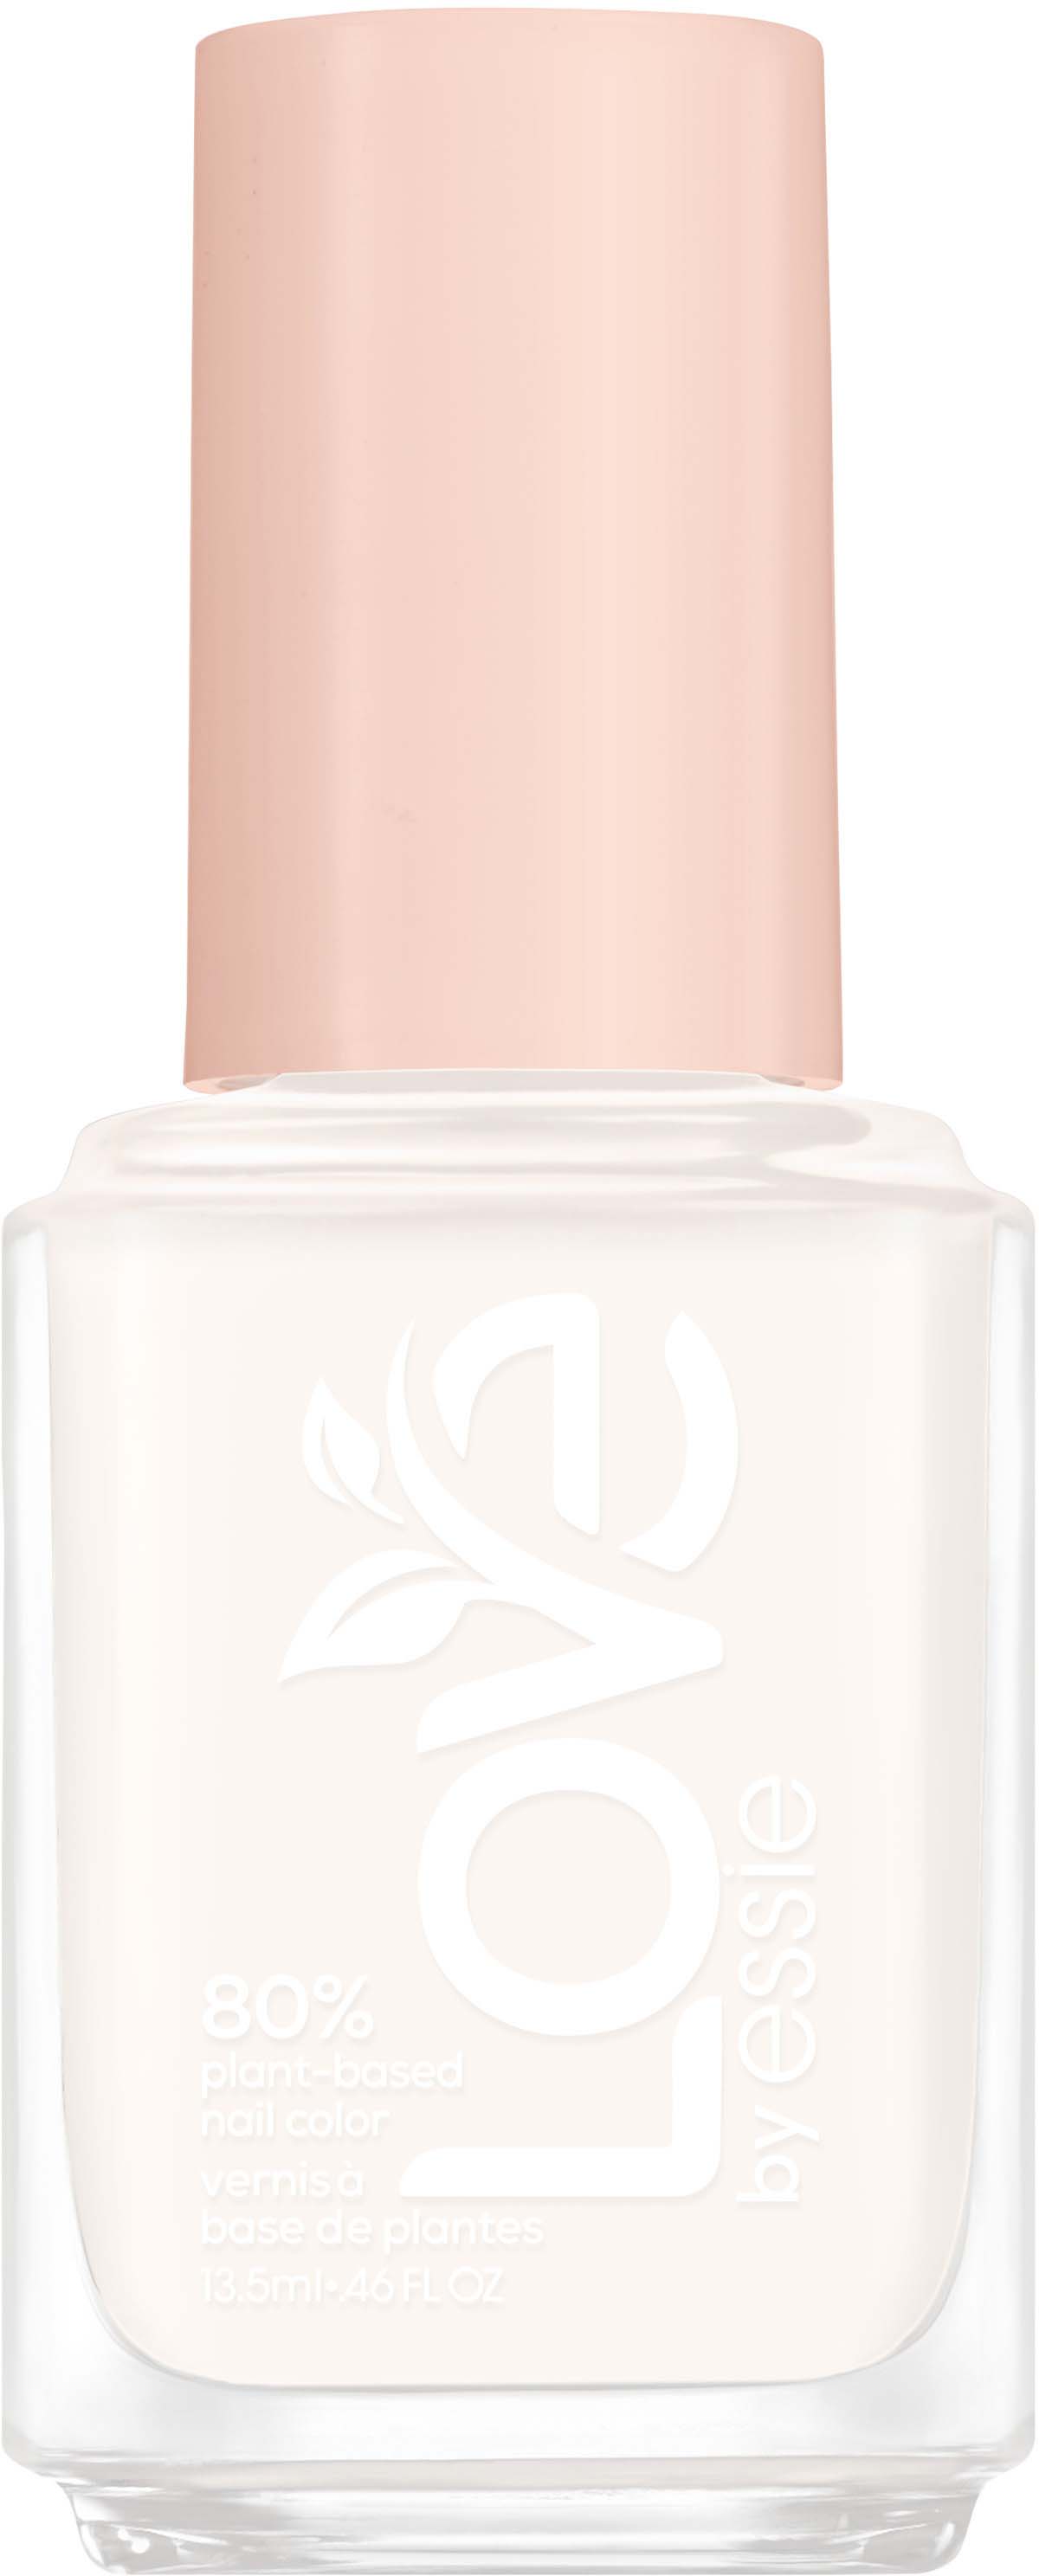 Essie LOVE by I 80% Nail Moment The Color 120 Am Plant-based Essie